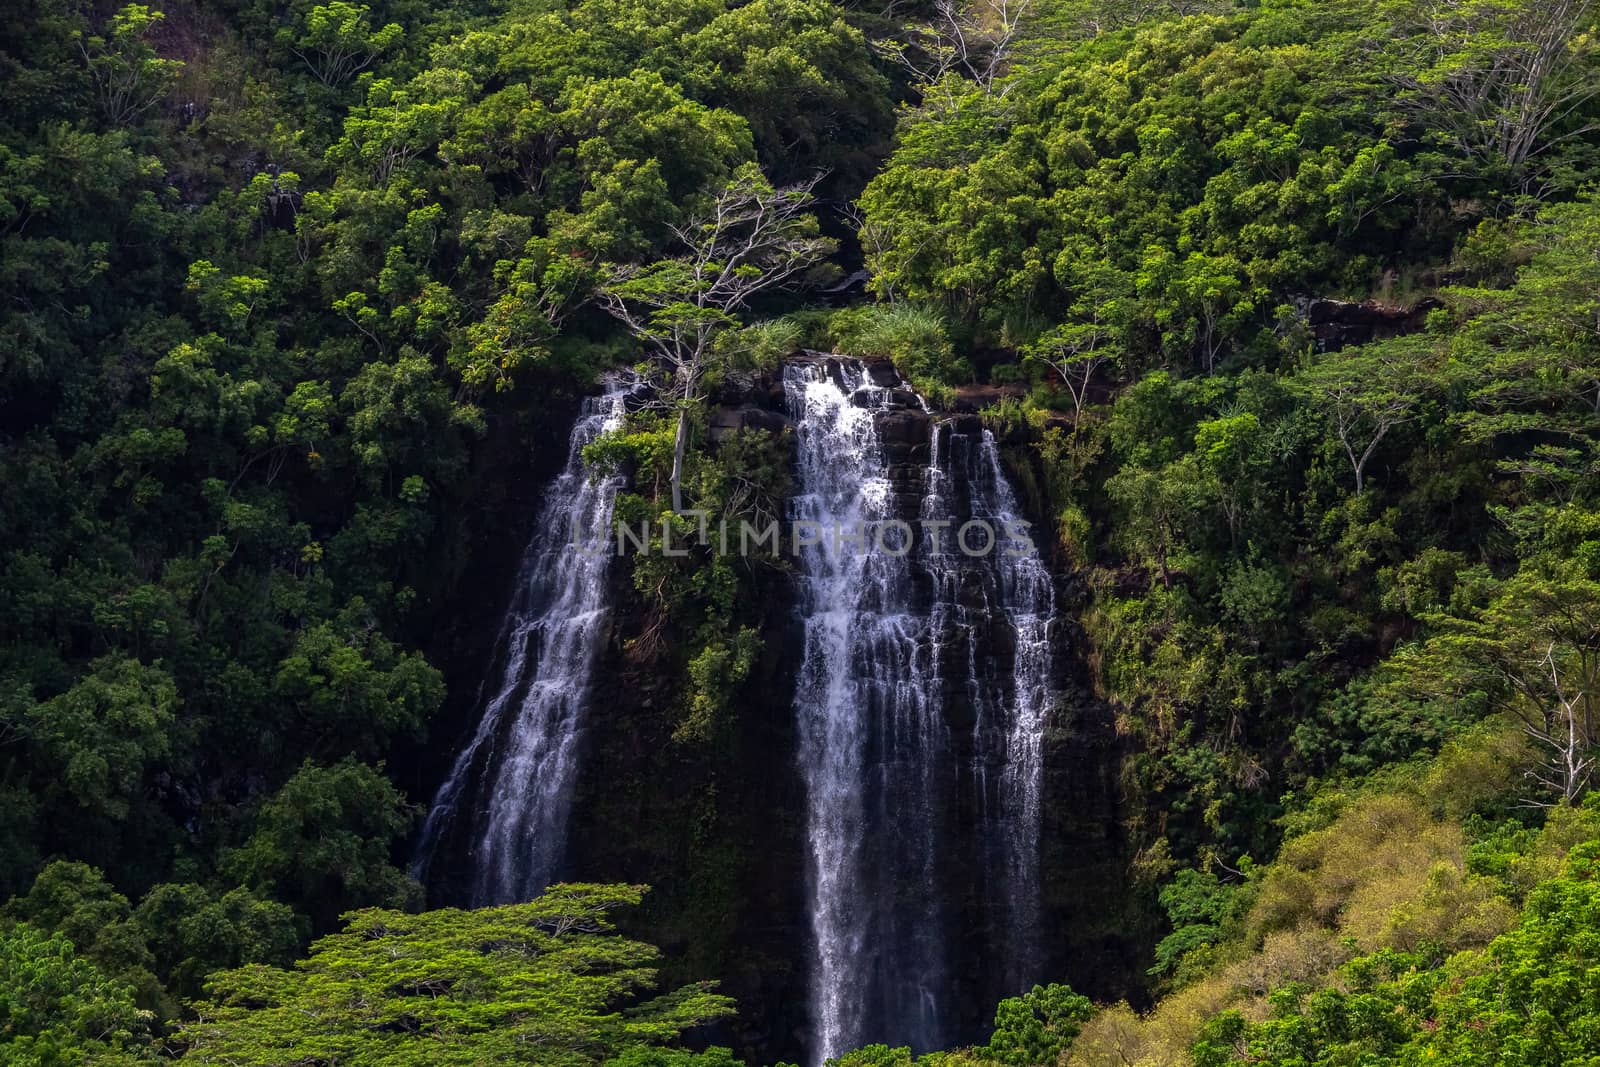 View of a gorgeous waterfall surrounded by green tropical forest in Hawaii, USA